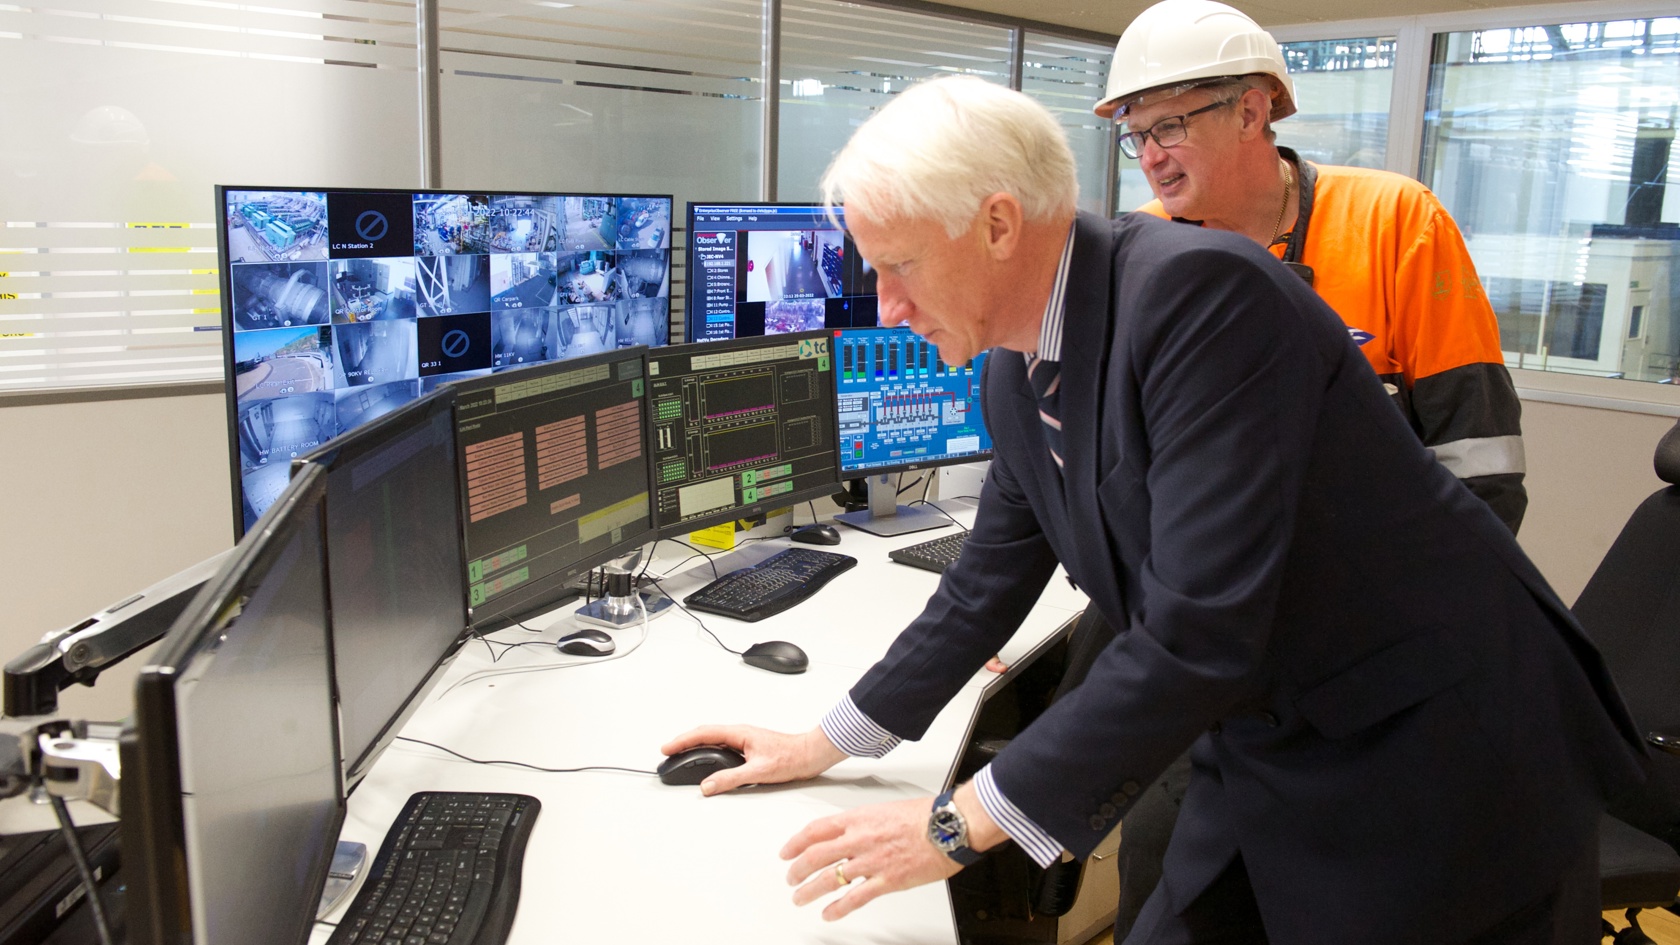 Engineer shows Lieutenant Governor computer systems at La Collette power station